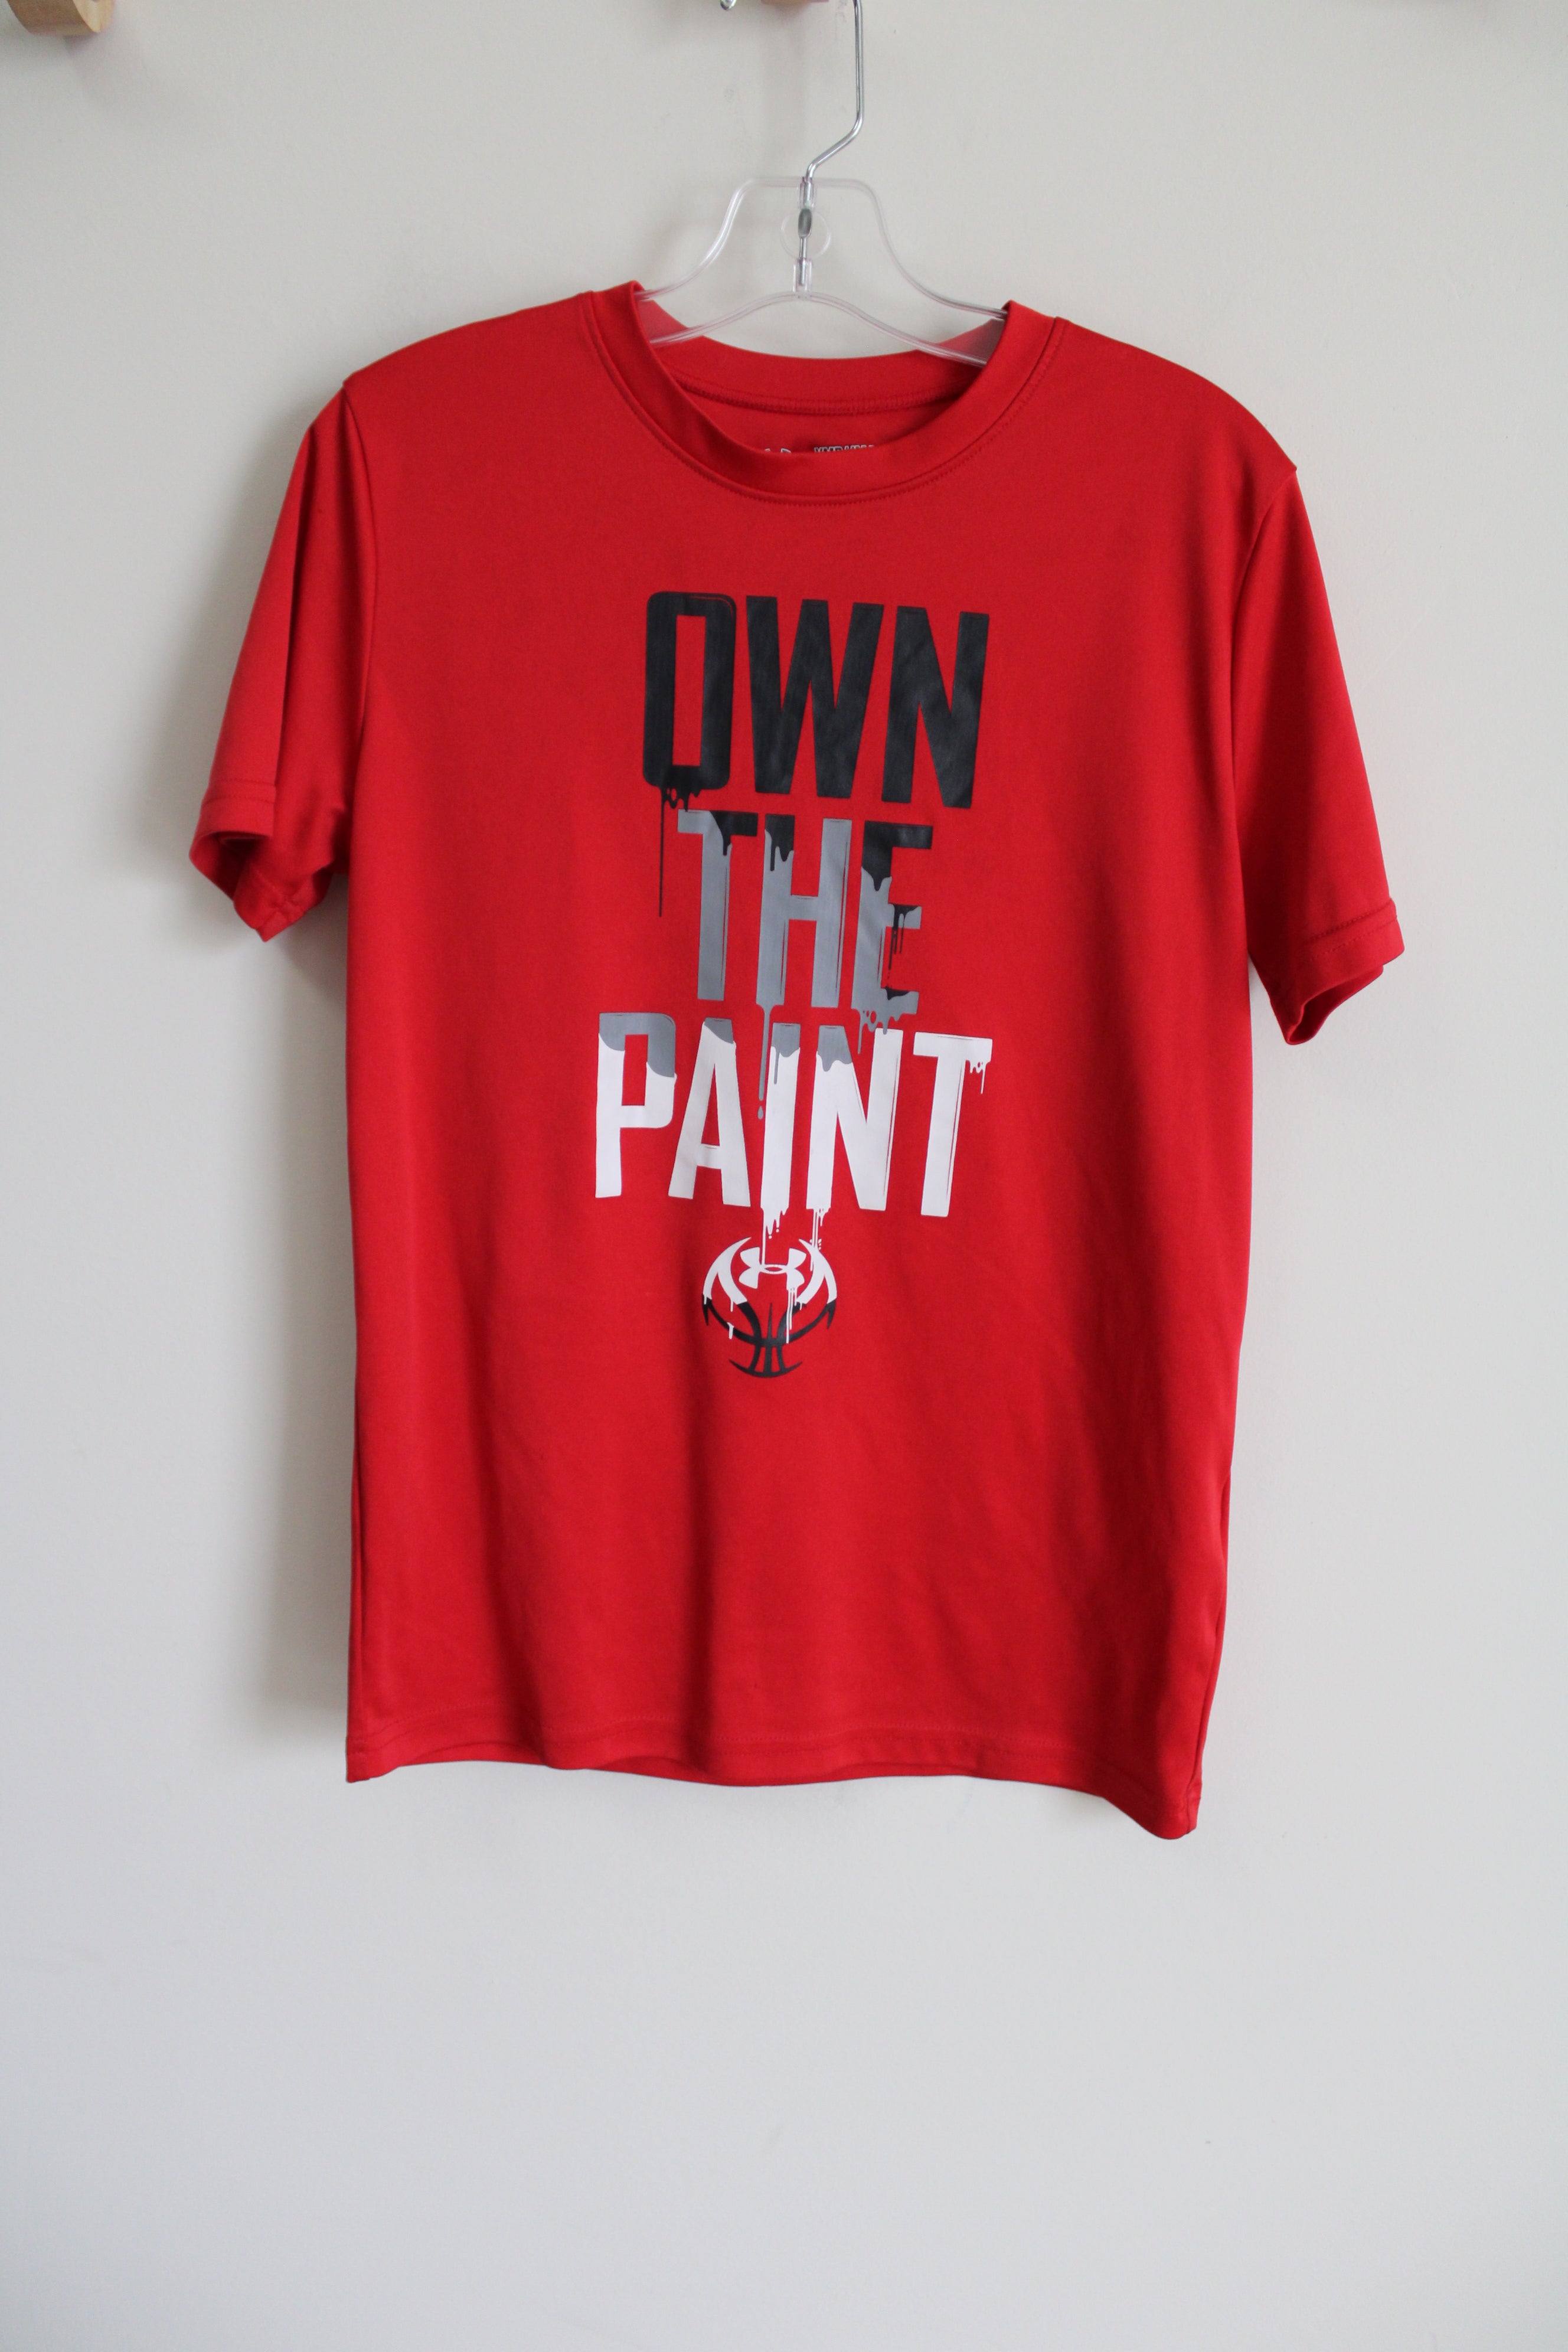 Under Armour Own The Paint Red Shirt | Youth M (10/12)